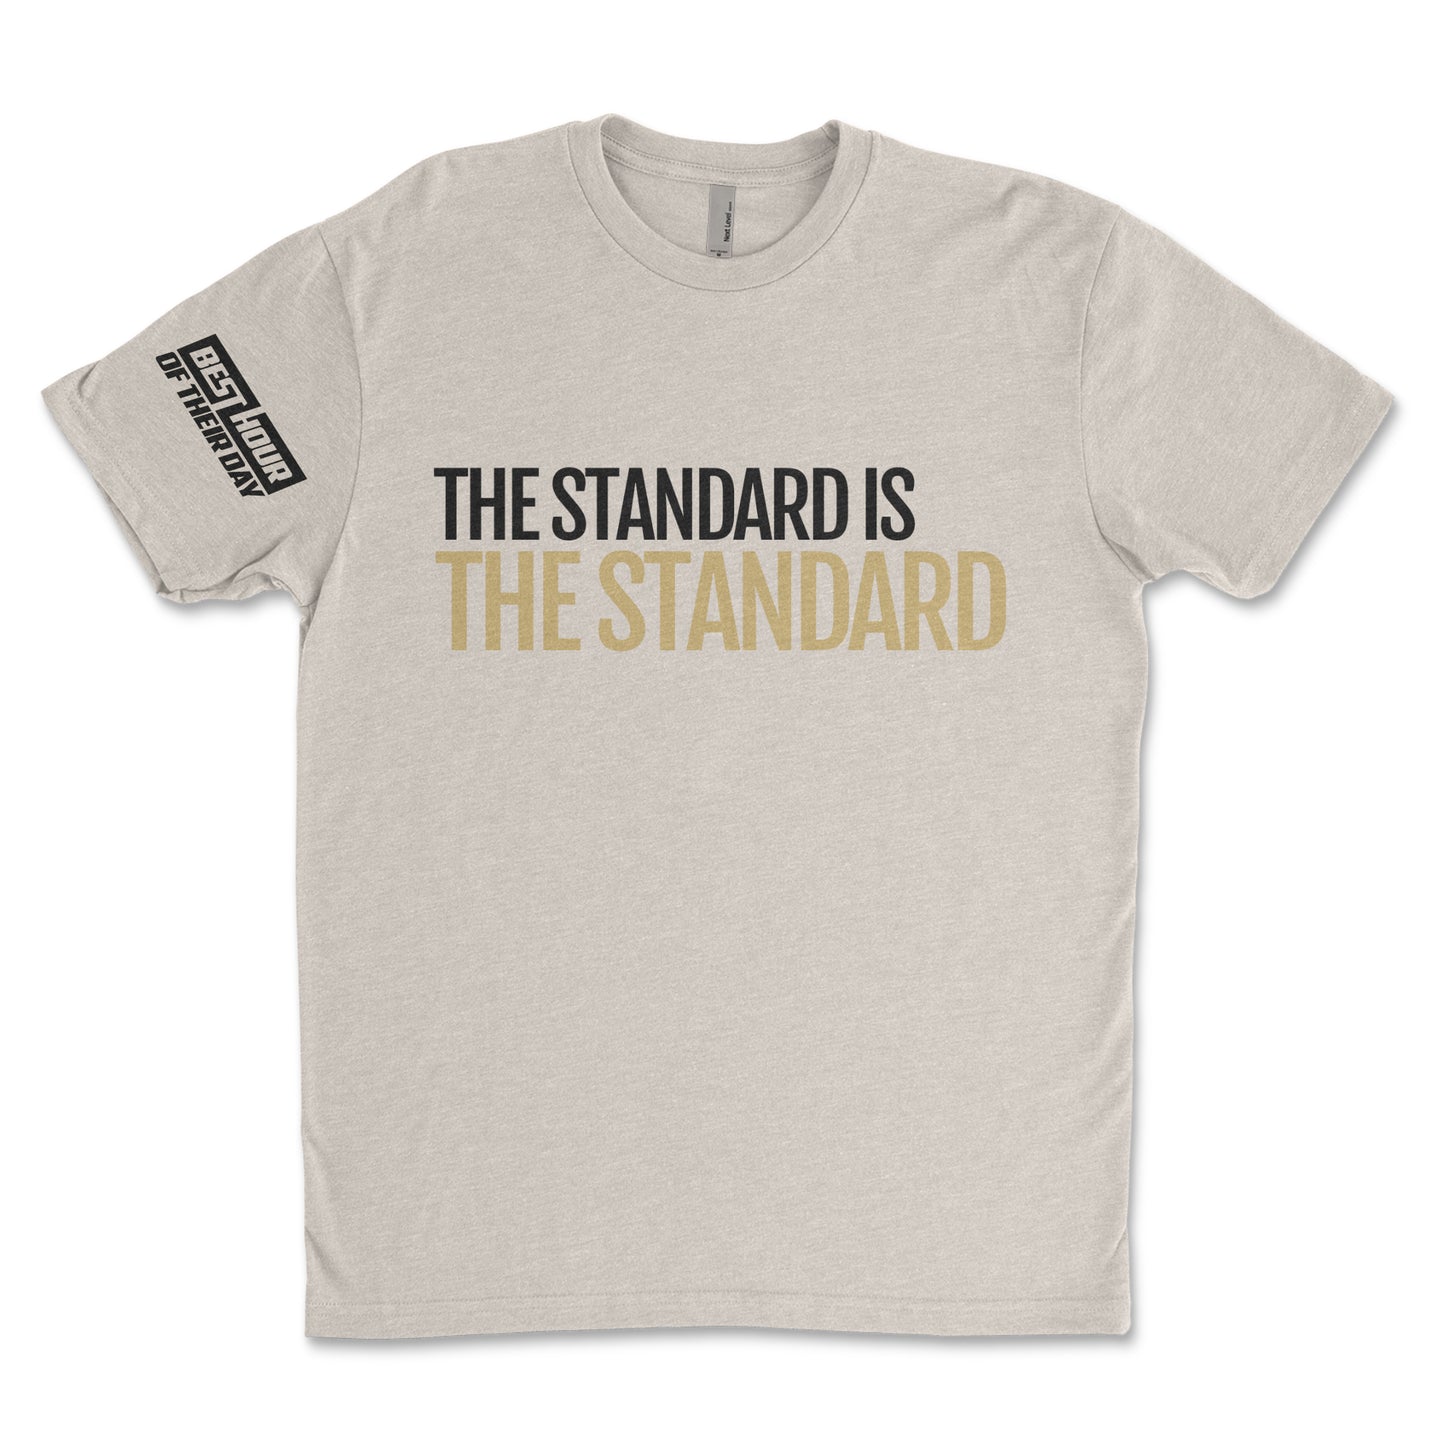 The Standard Is The Standard Tee